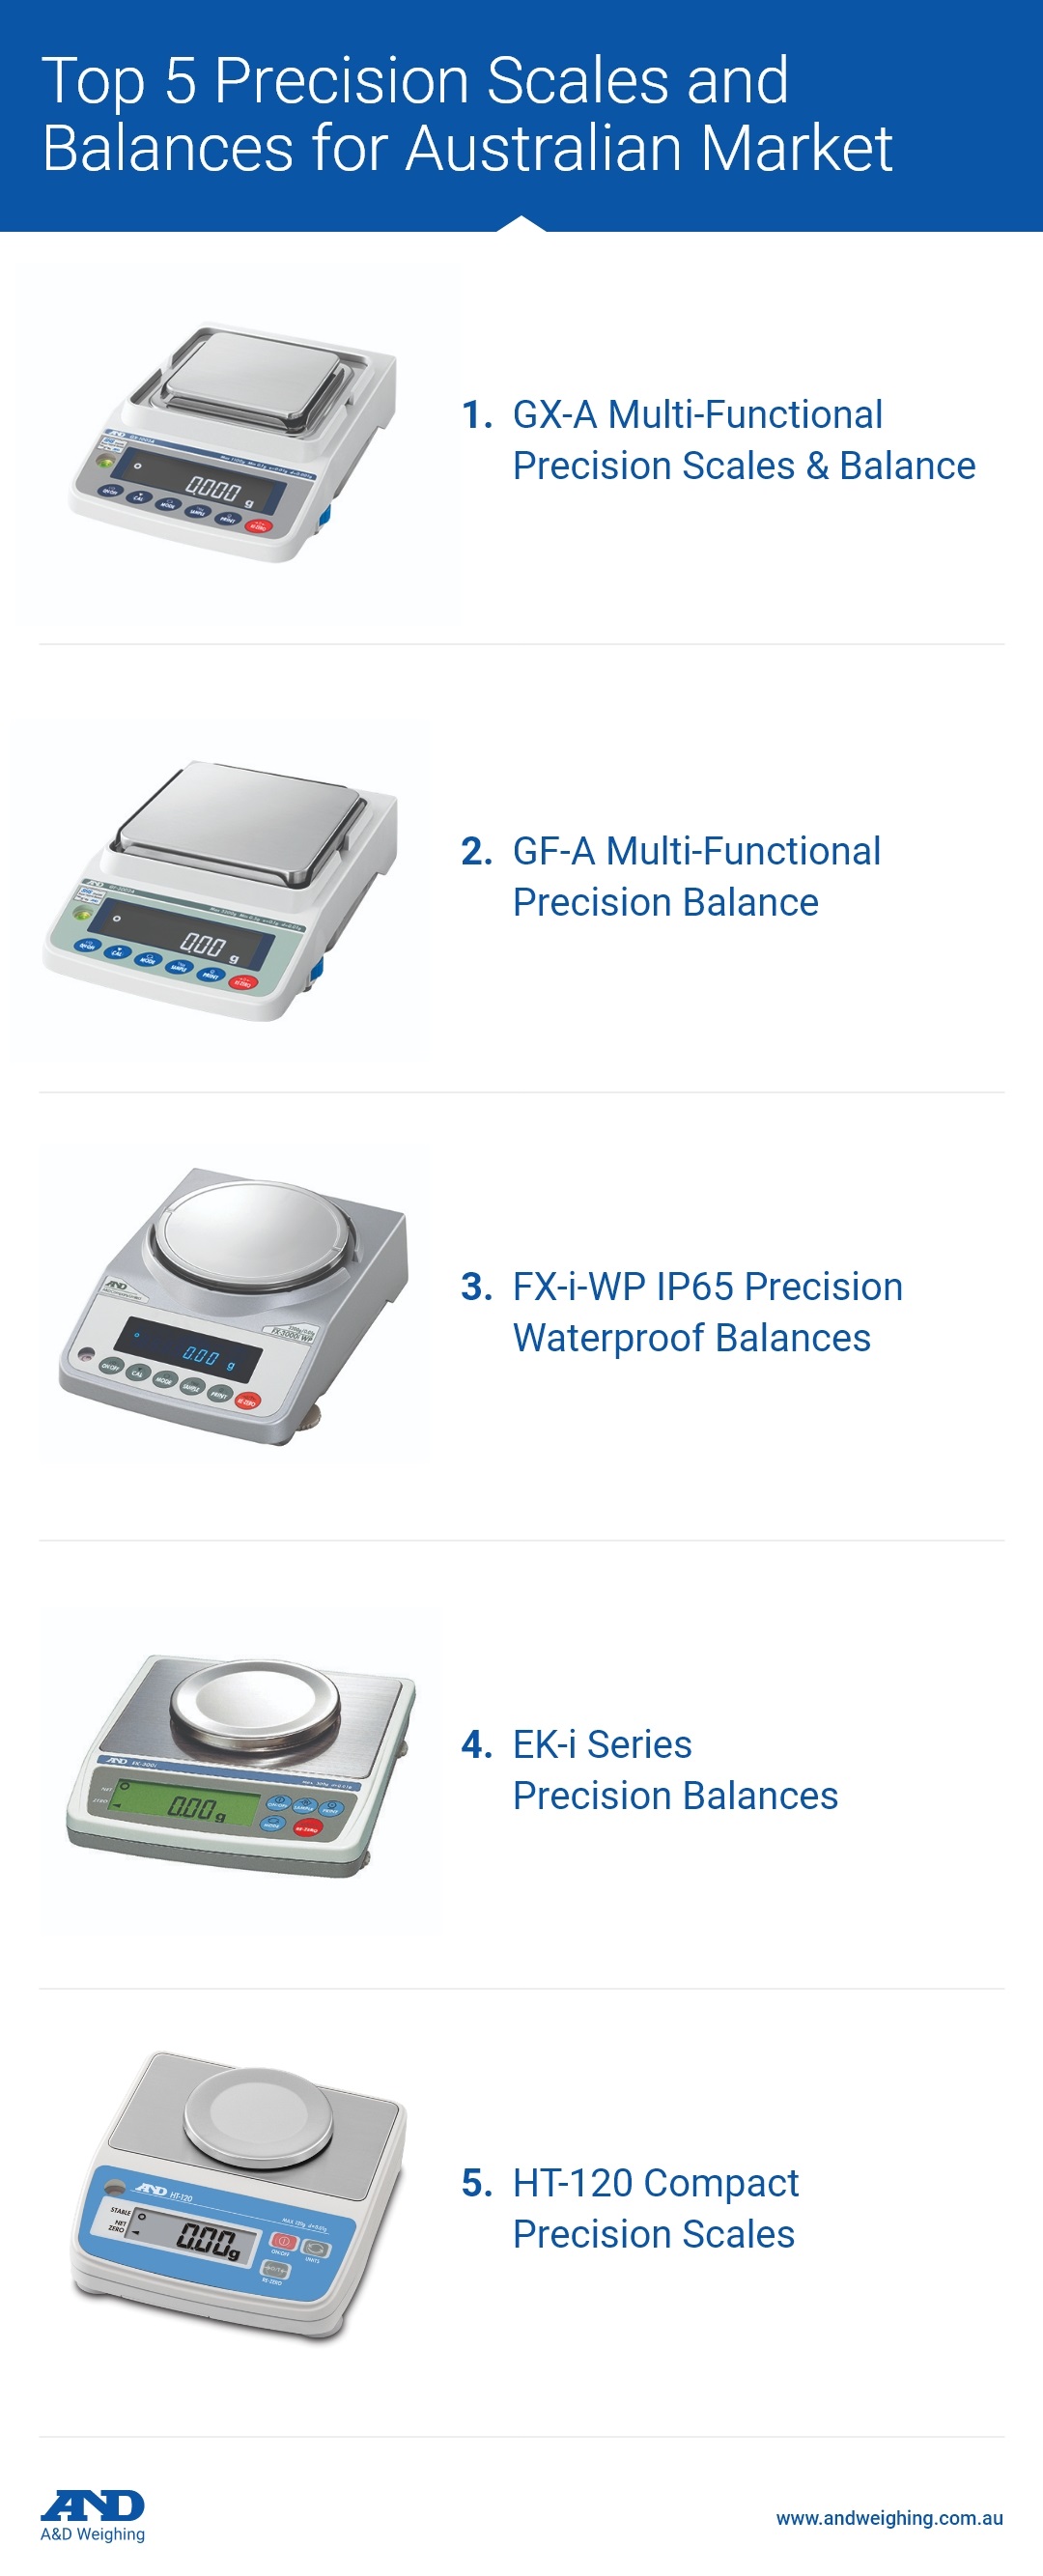 Top 5 Precision Scales and Balances for Australian Market